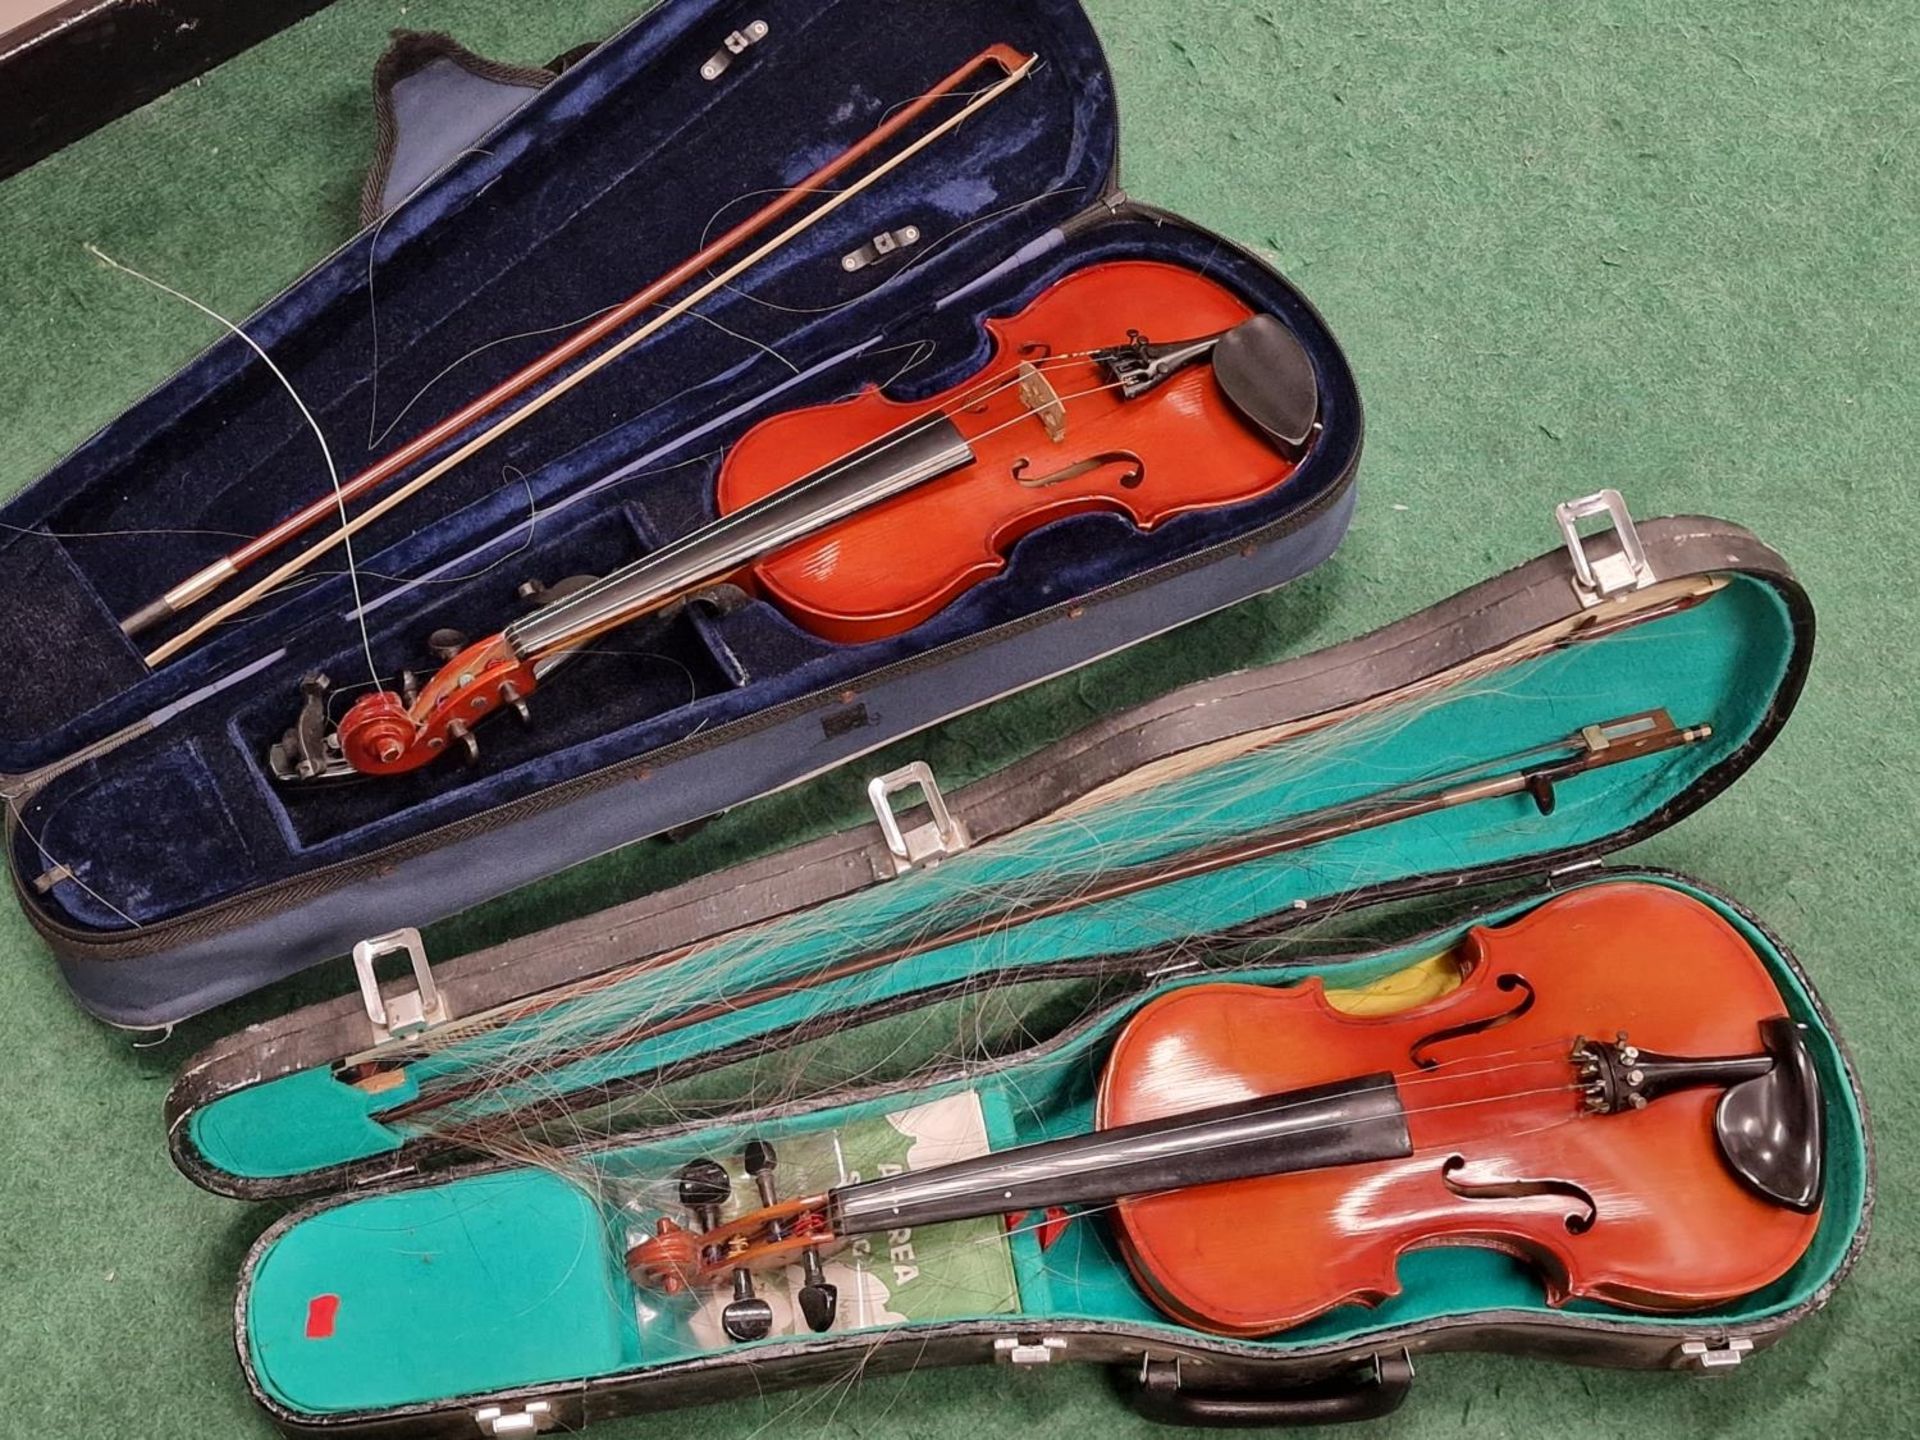 2 x violins both with hard carry cases and bows